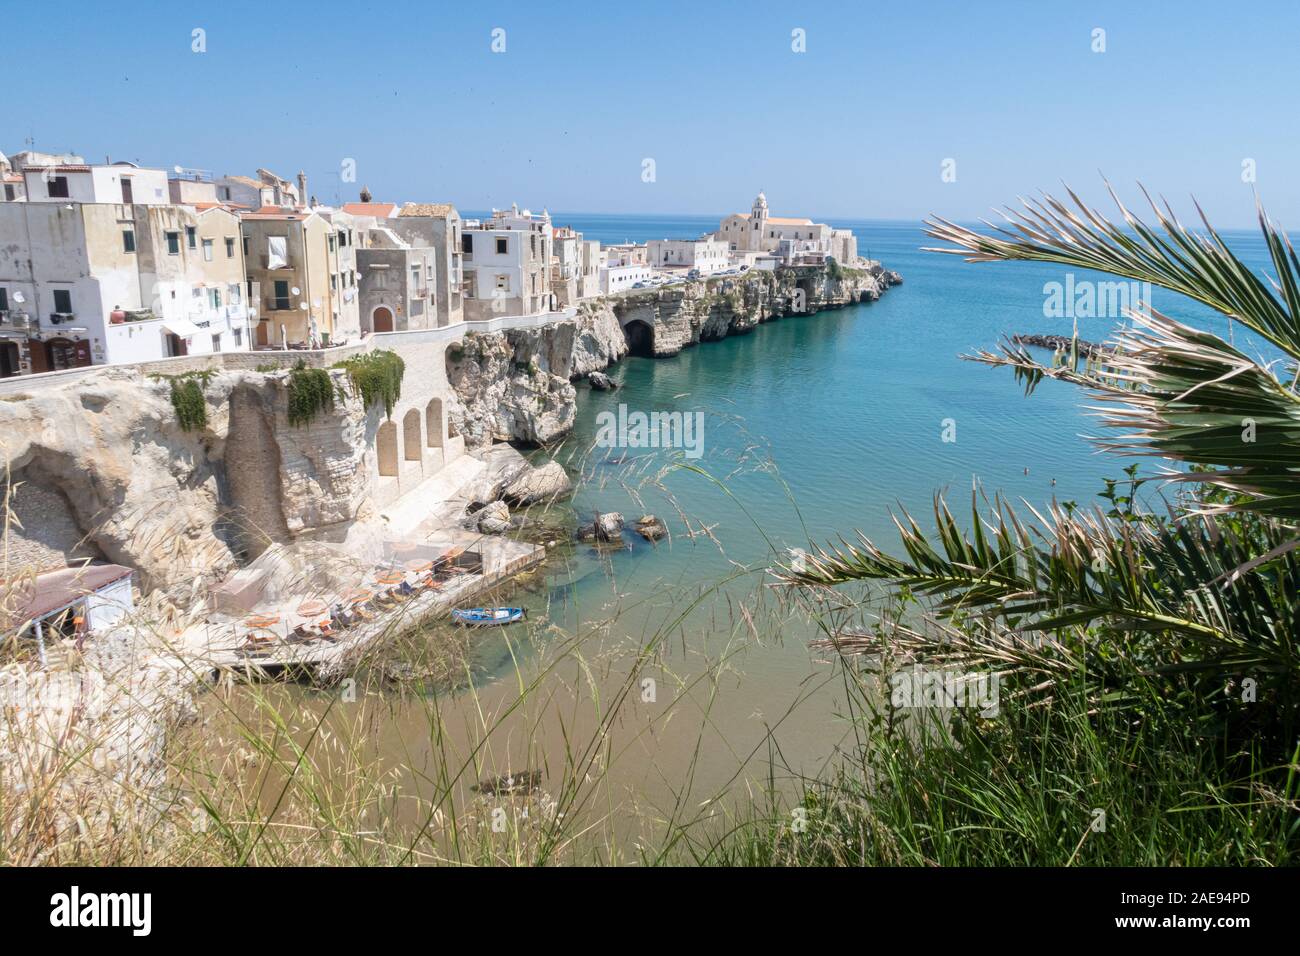 The coast and the old town of Vieste, Gargano, Puglia. Stock Photo